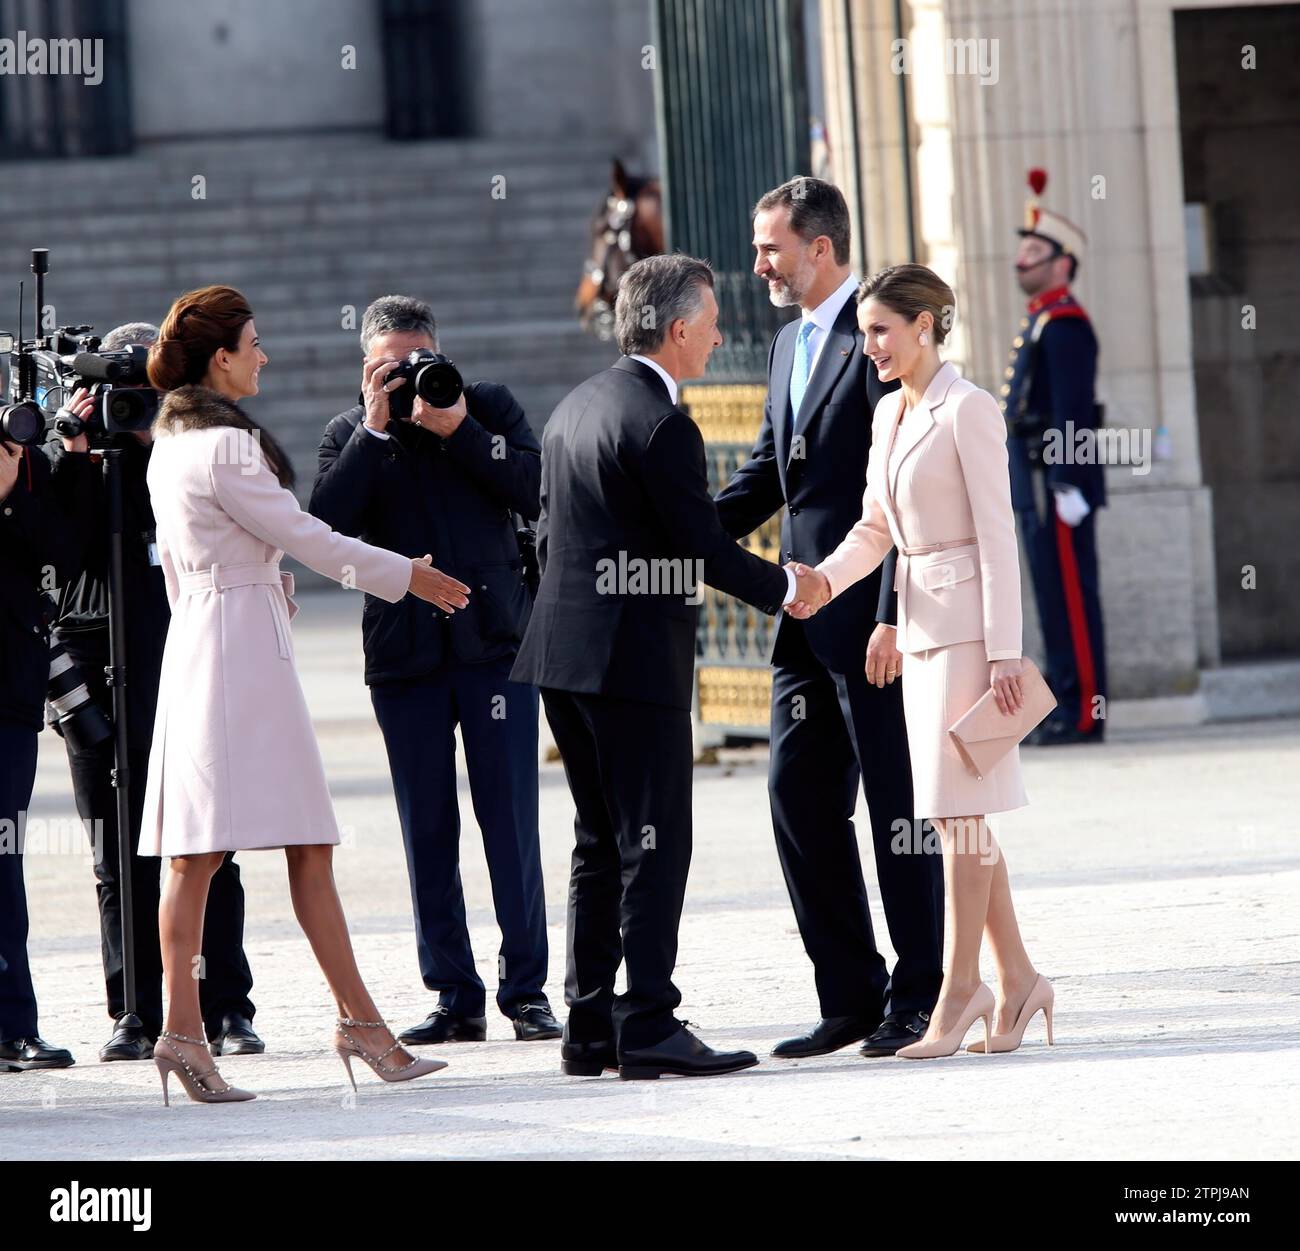 Madrid, 02/22/2017. Official visit of the president of Agentina Mauricio Macri. The president and his wife are received by His Majesty. the Kings in the Royal Palace. Photo: Ernesto Agudo. ARCHDC. Credit: Album / Archivo ABC / Ernesto Agudo Stock Photo